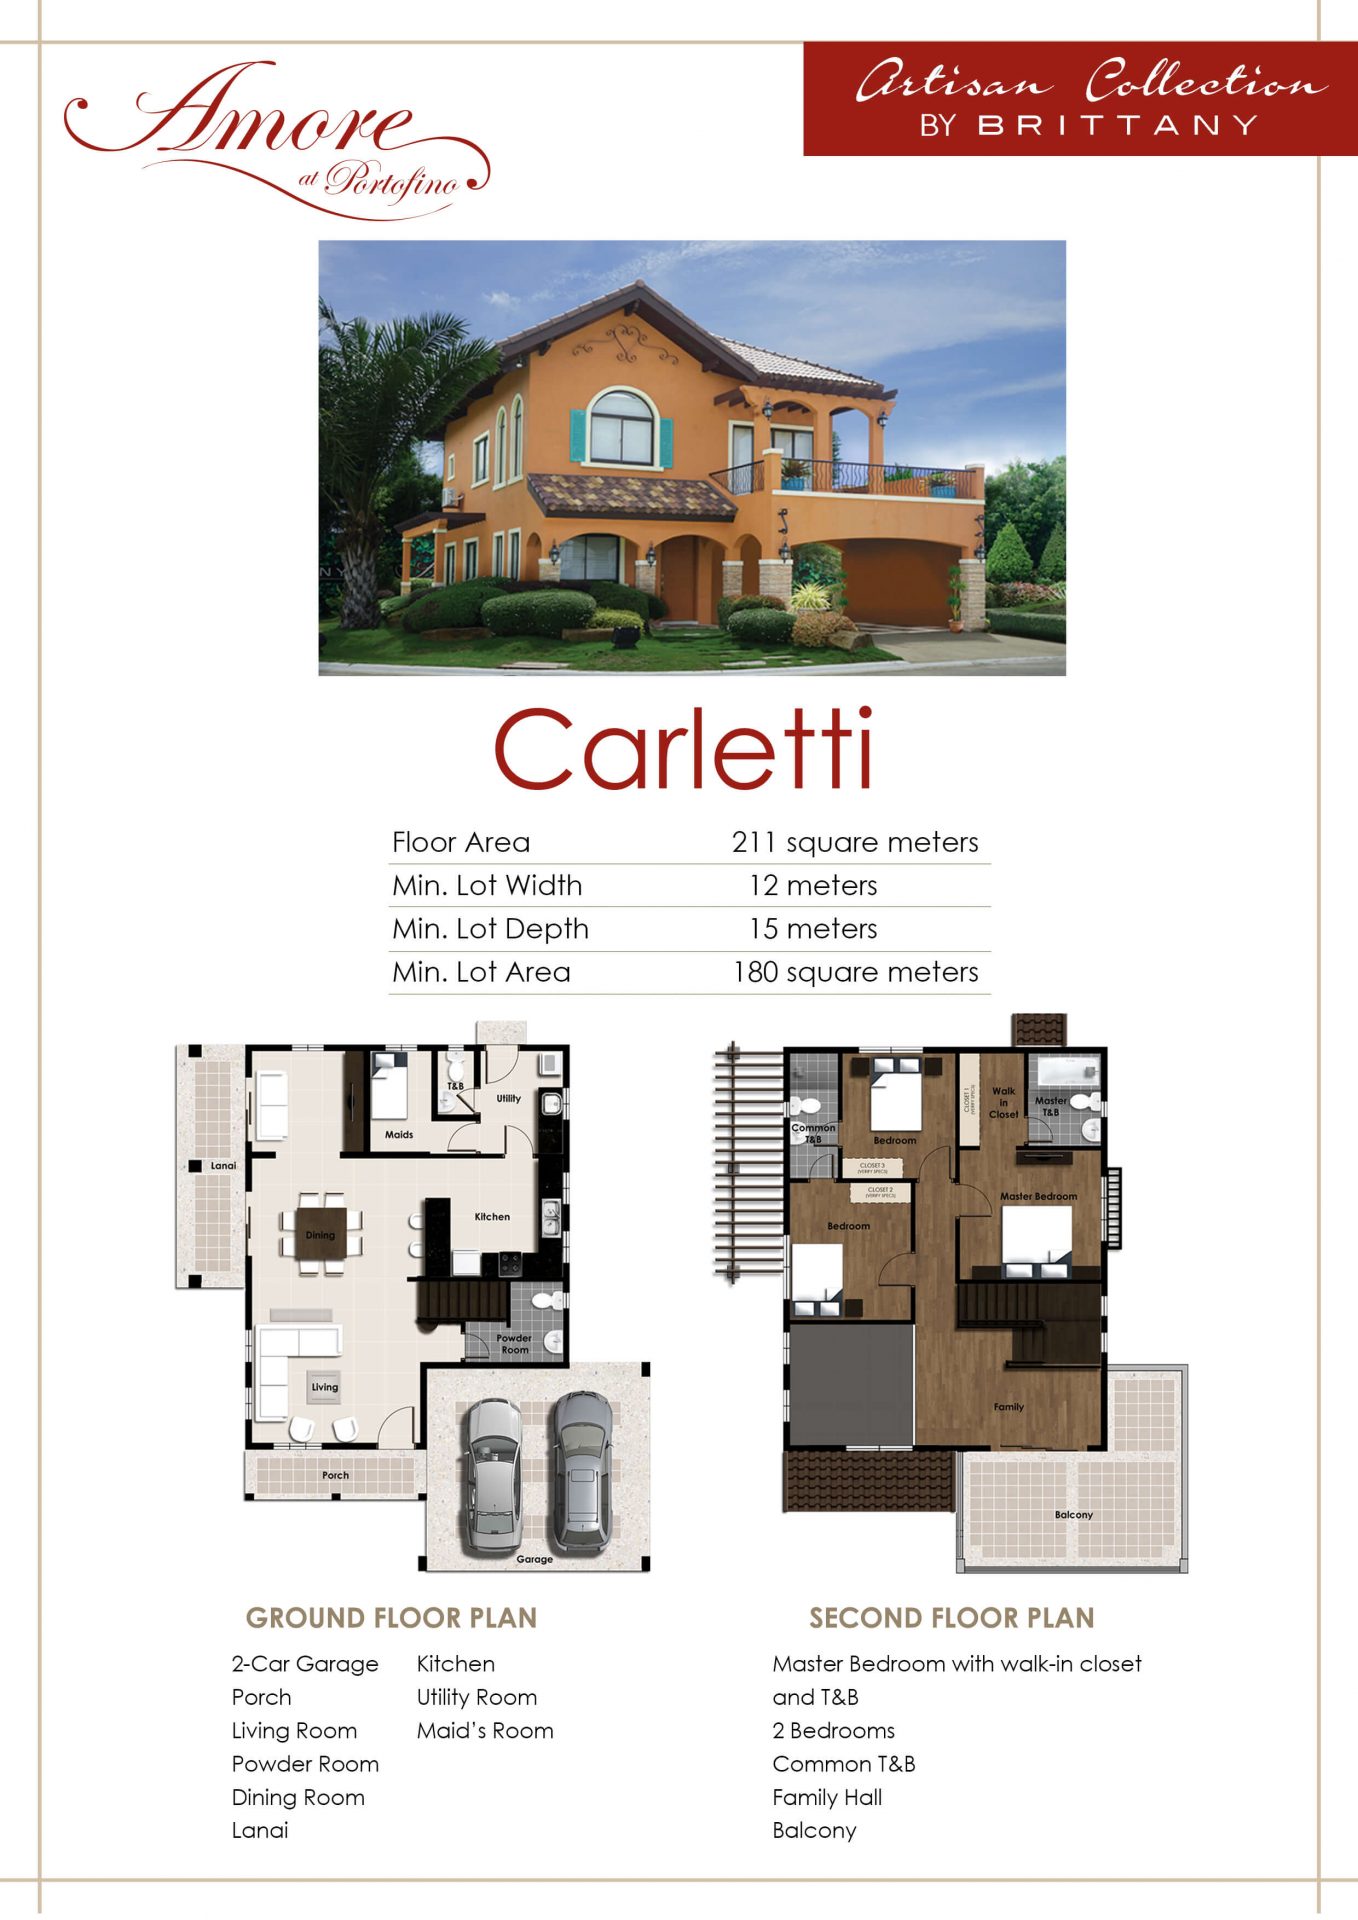 Vista Alabang | Amore at Portofino | Carletti House Model Infographic | Luxury Homes by Brittany Corporation